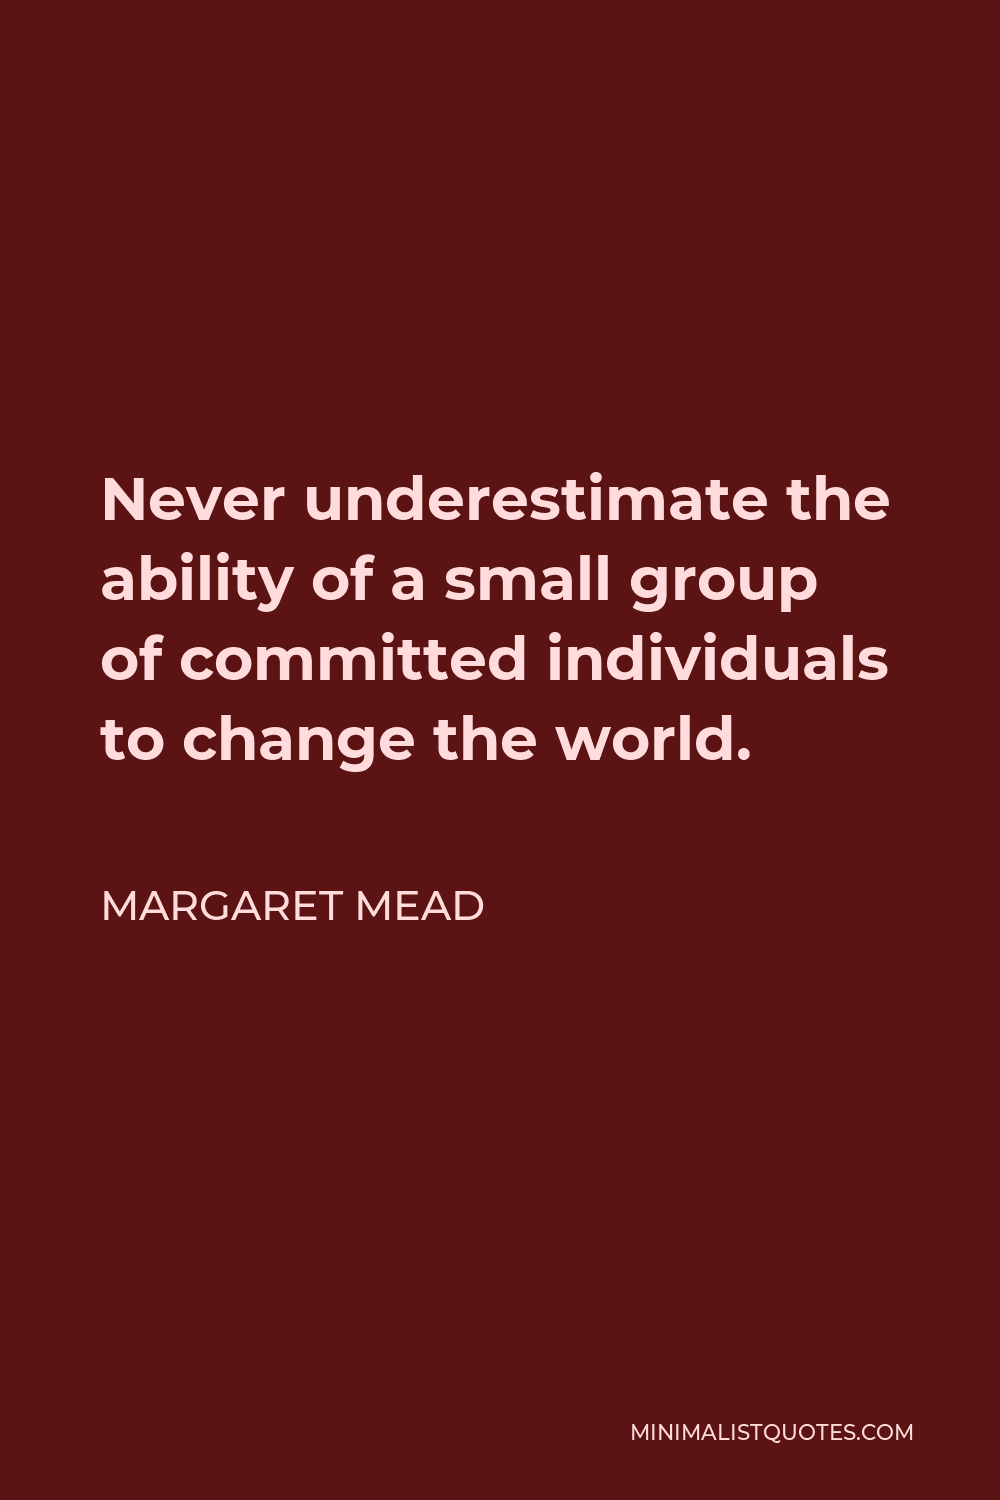 Never underestimate the power of a small group of people to change